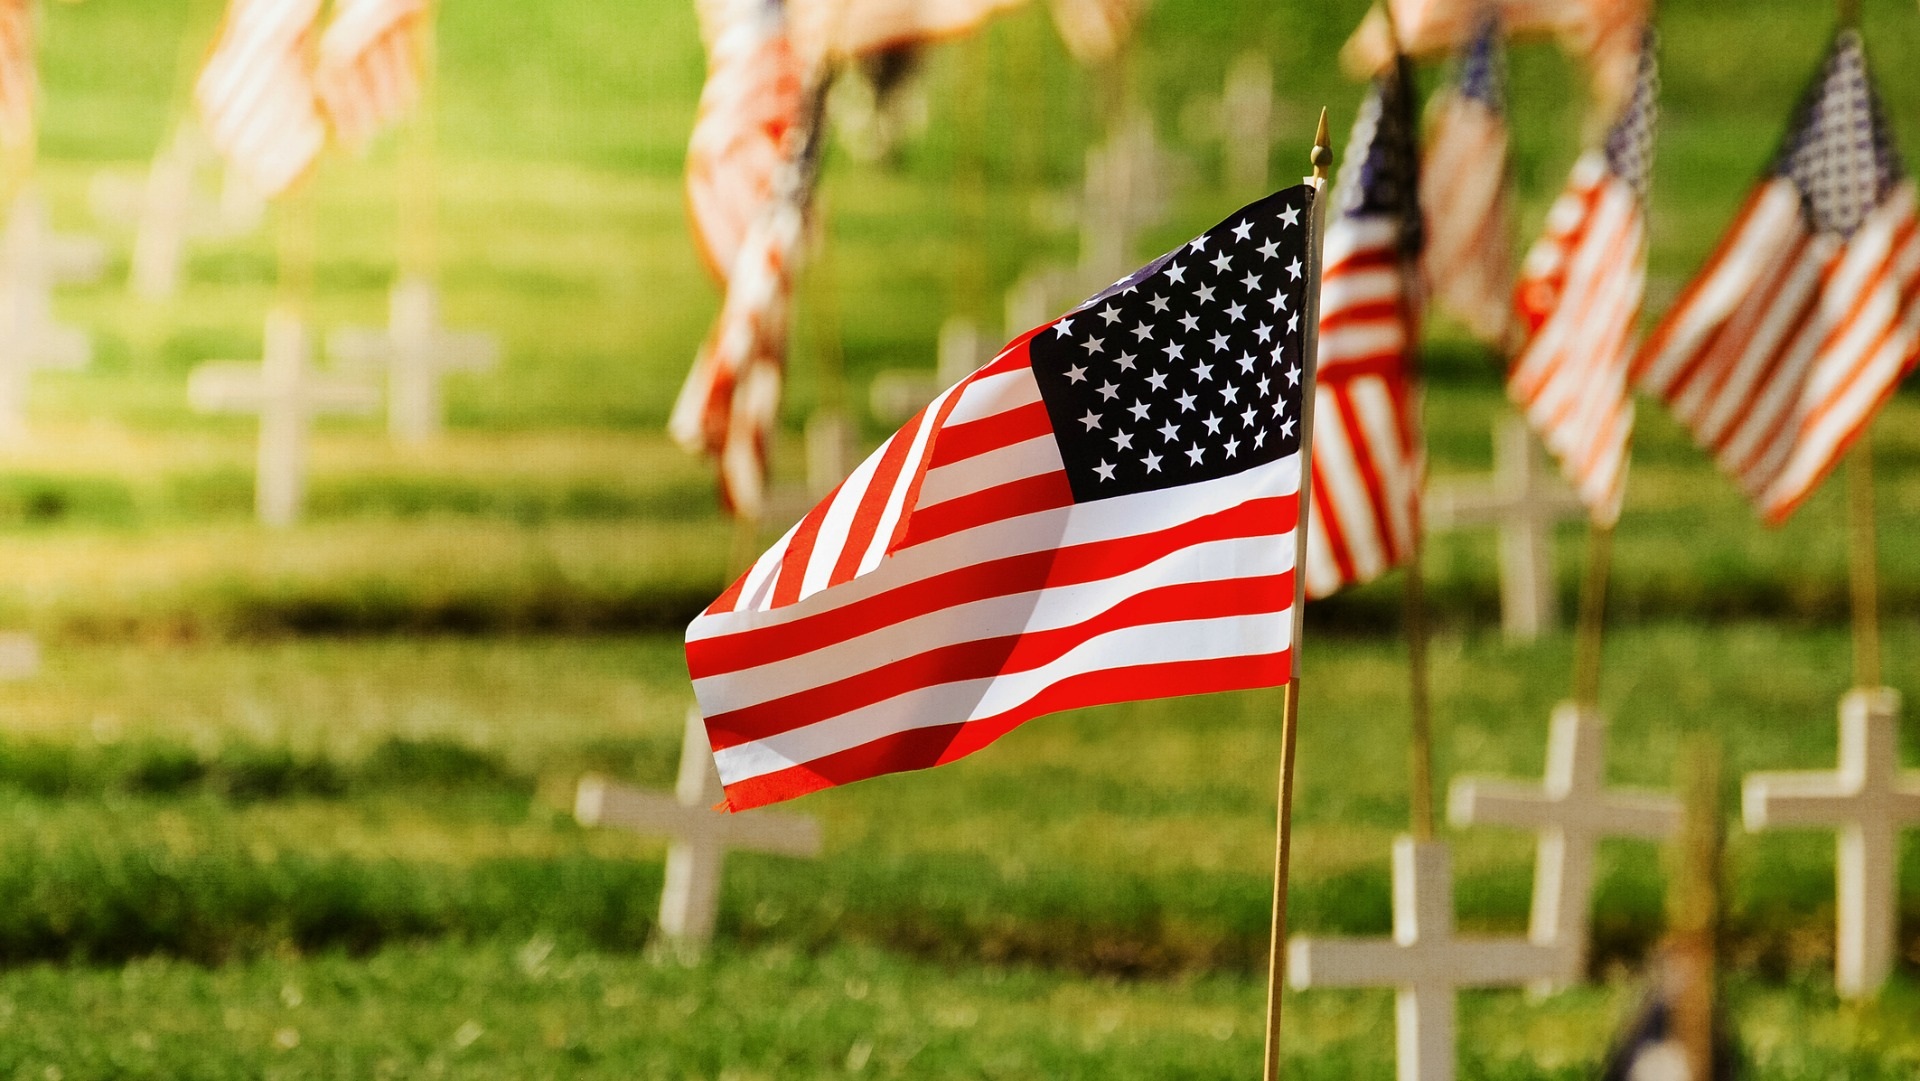 memorial day wallpaper,flag of the united states,flag,flag day (usa),memorial day,grass